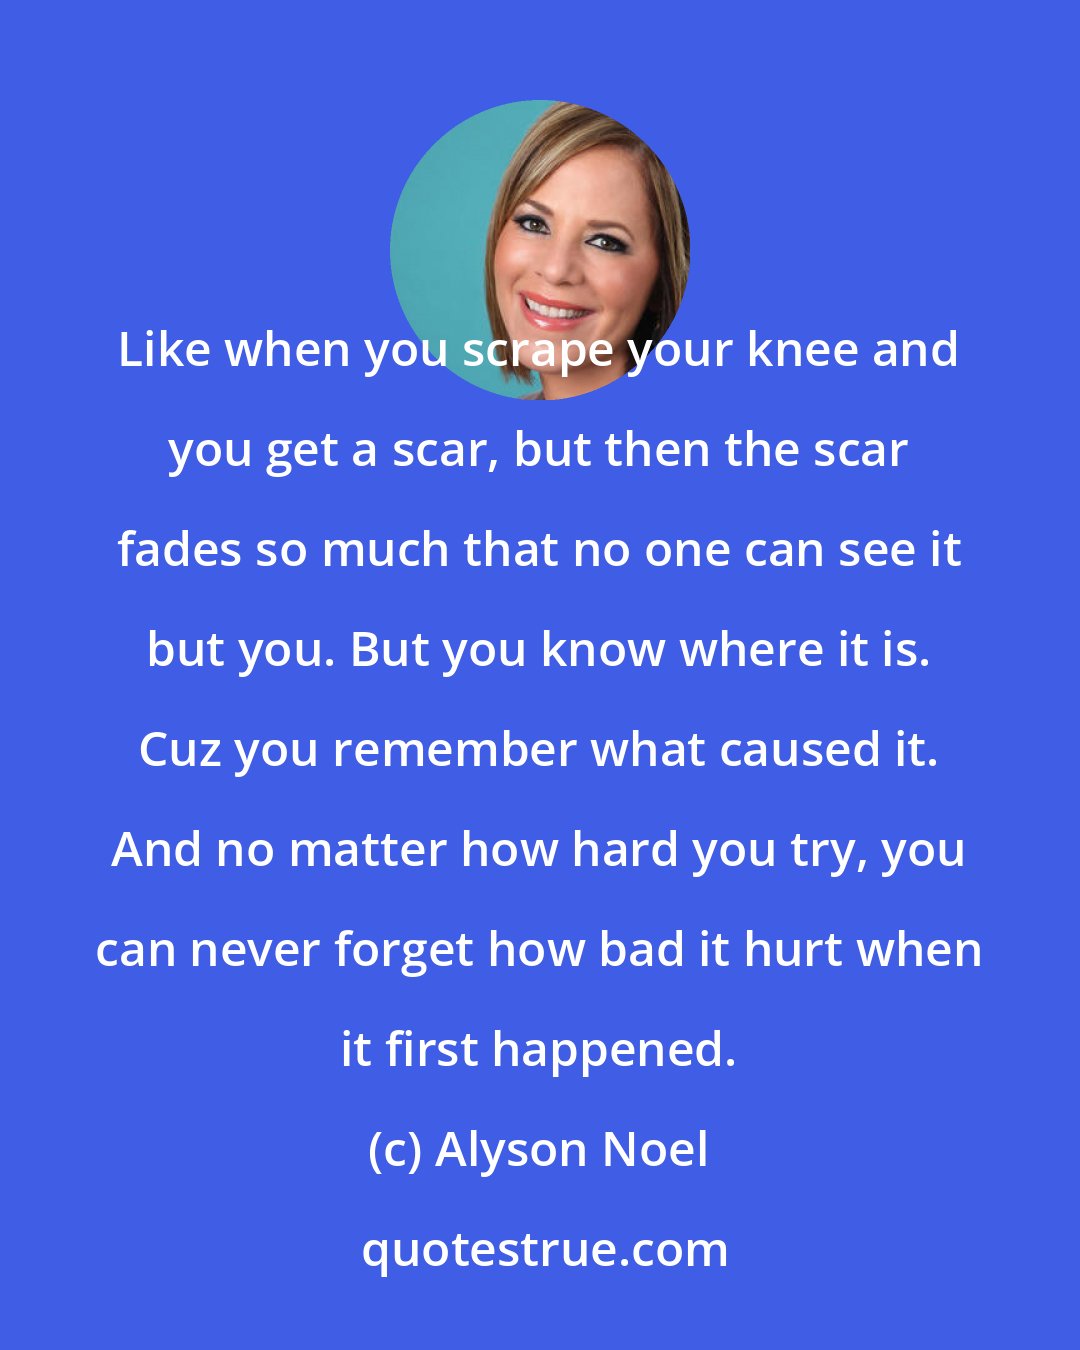 Alyson Noel: Like when you scrape your knee and you get a scar, but then the scar fades so much that no one can see it but you. But you know where it is. Cuz you remember what caused it. And no matter how hard you try, you can never forget how bad it hurt when it first happened.